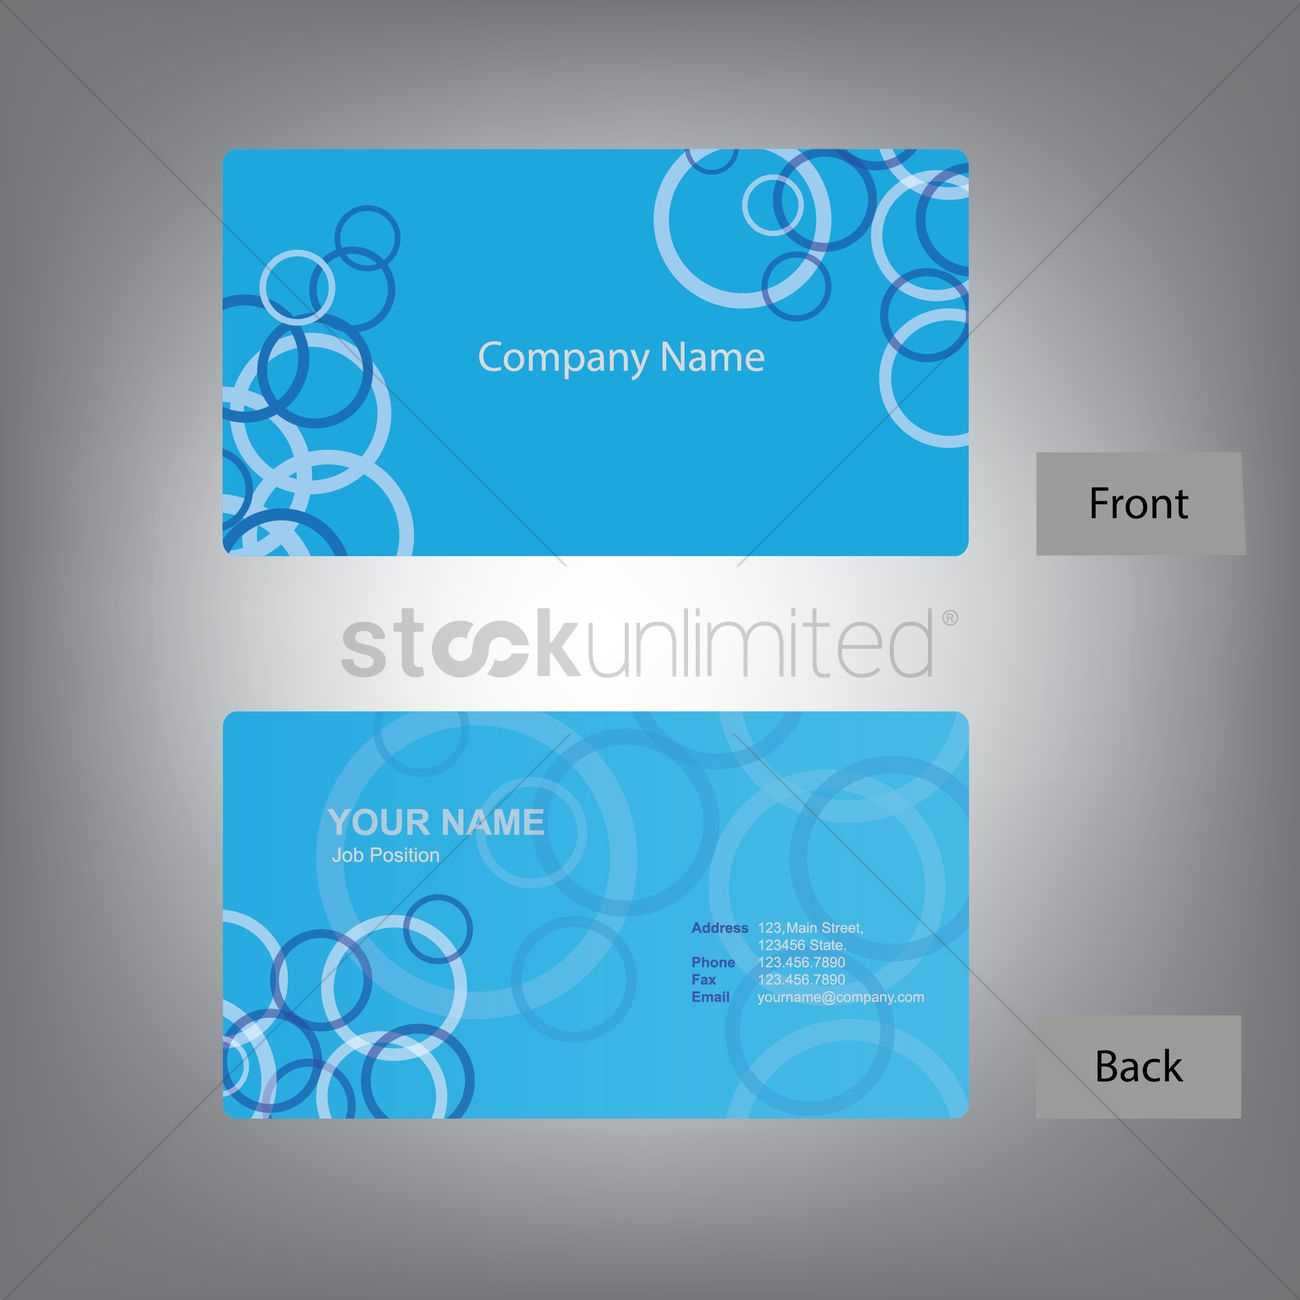 Front And Back Business Card Template Word ] – Card Template Throughout Front And Back Business Card Template Word